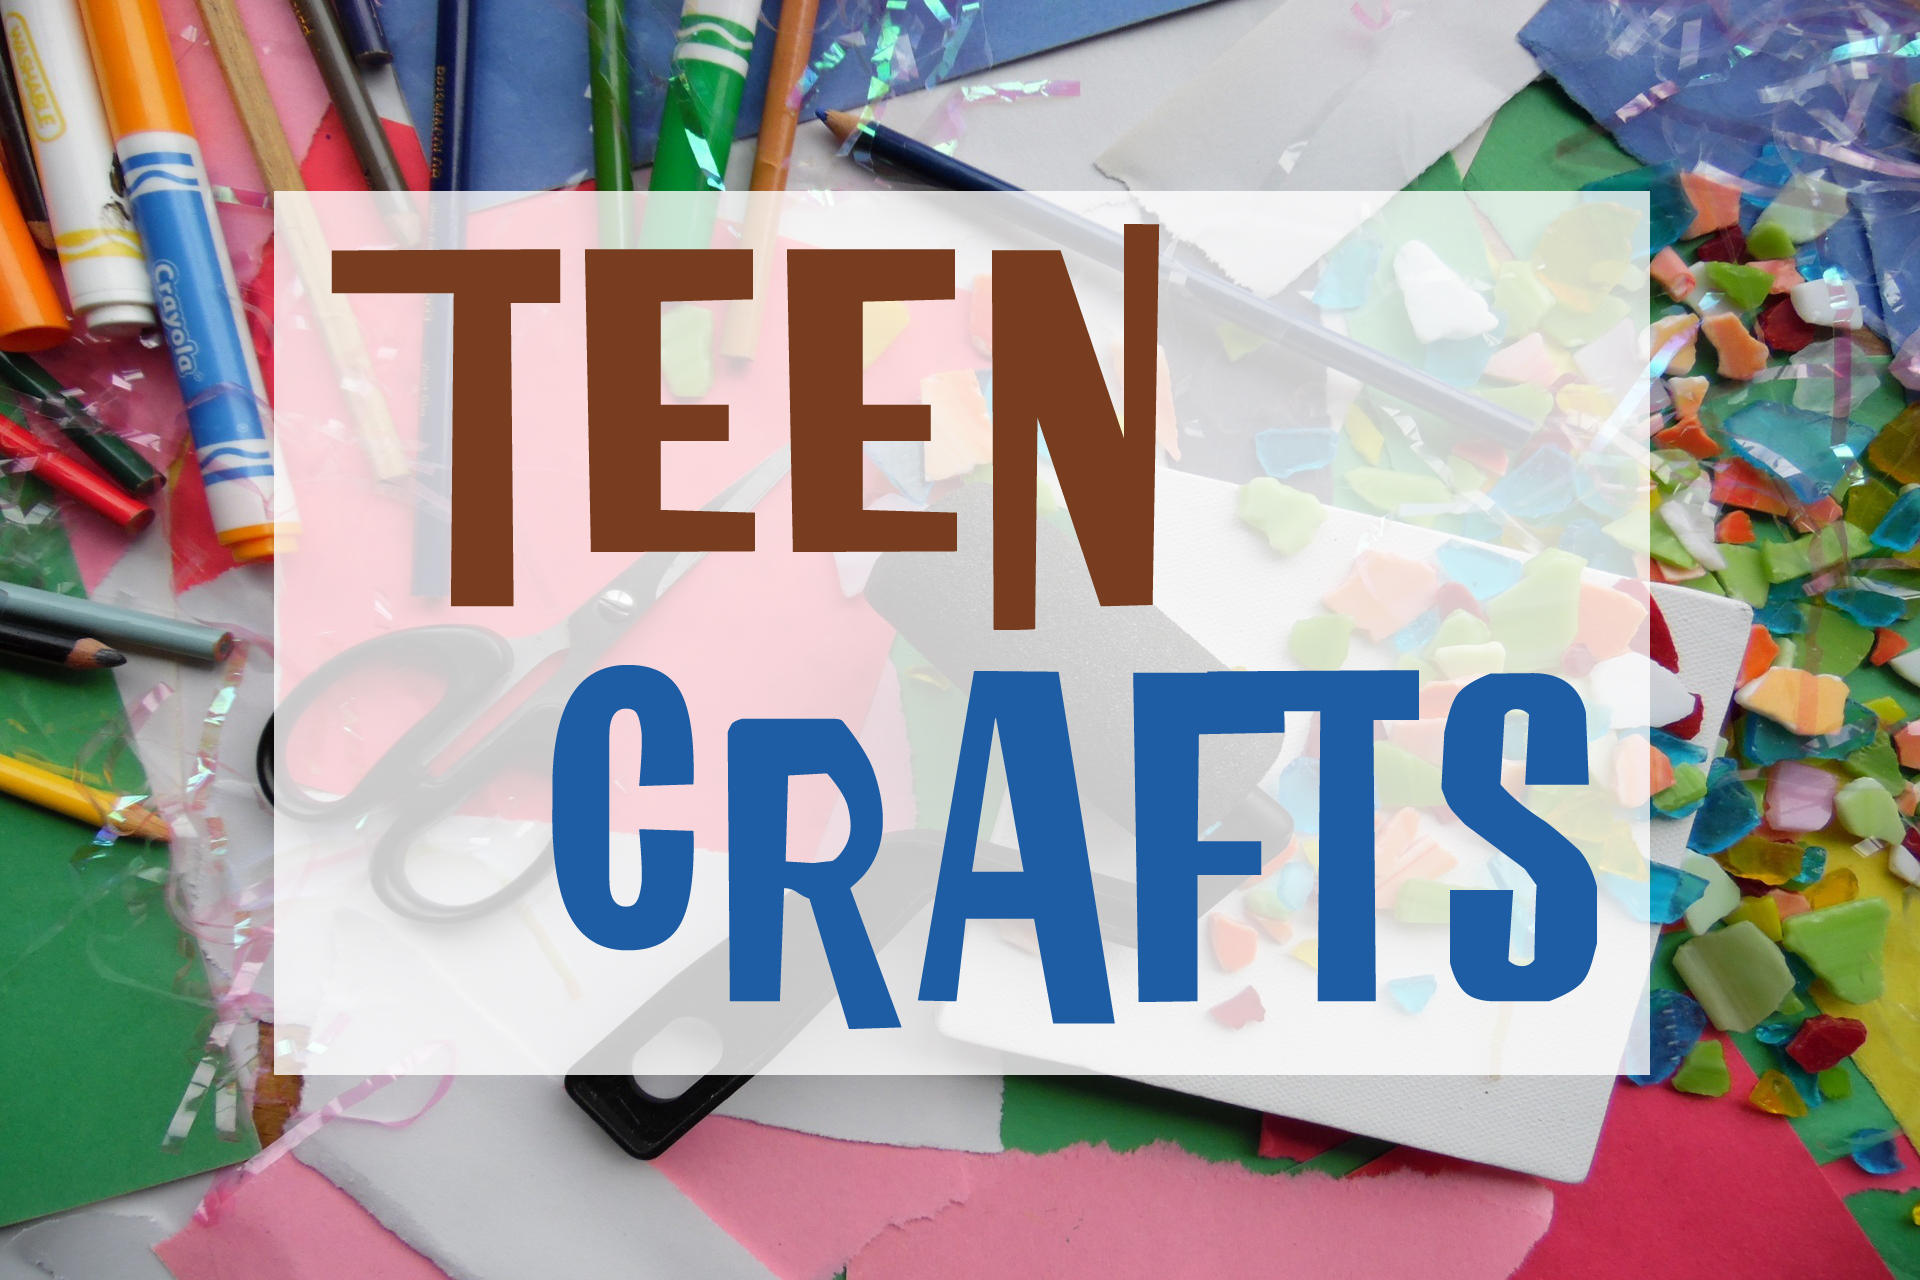 Boondoggles for Teen Crafts